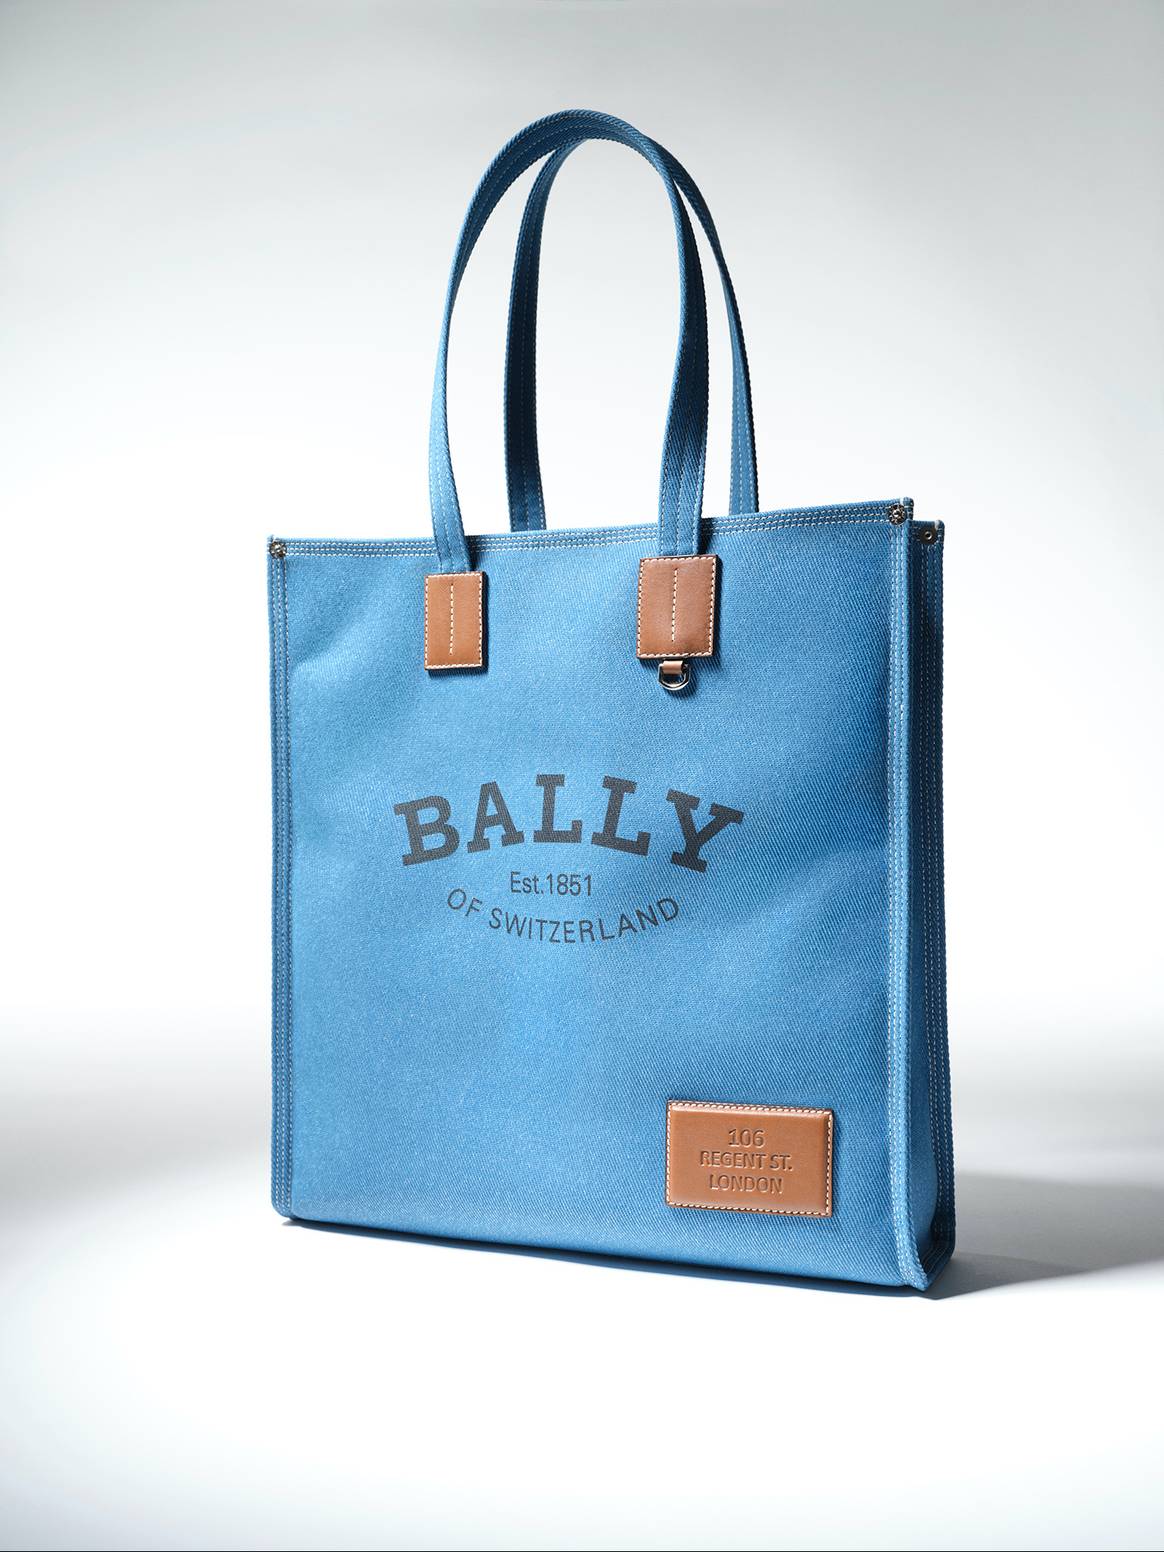 Image: courtesy of Bally by GG Archard (@gg_archard)